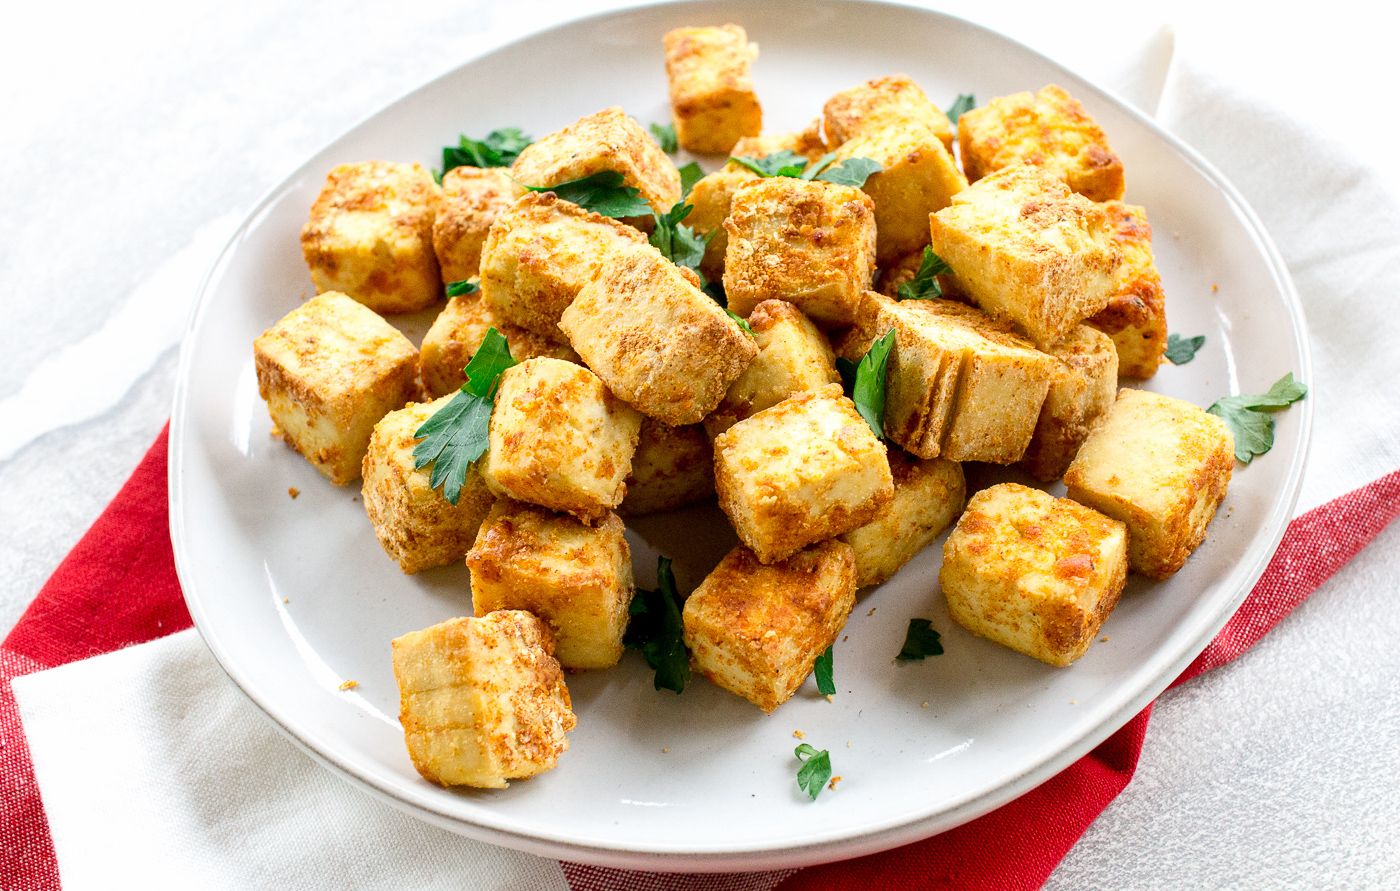 Does Your Real Age Match Your Taste Buds’ Age? Pick a Food for Each of These 16 Ingredients to Find Out 2 tofu